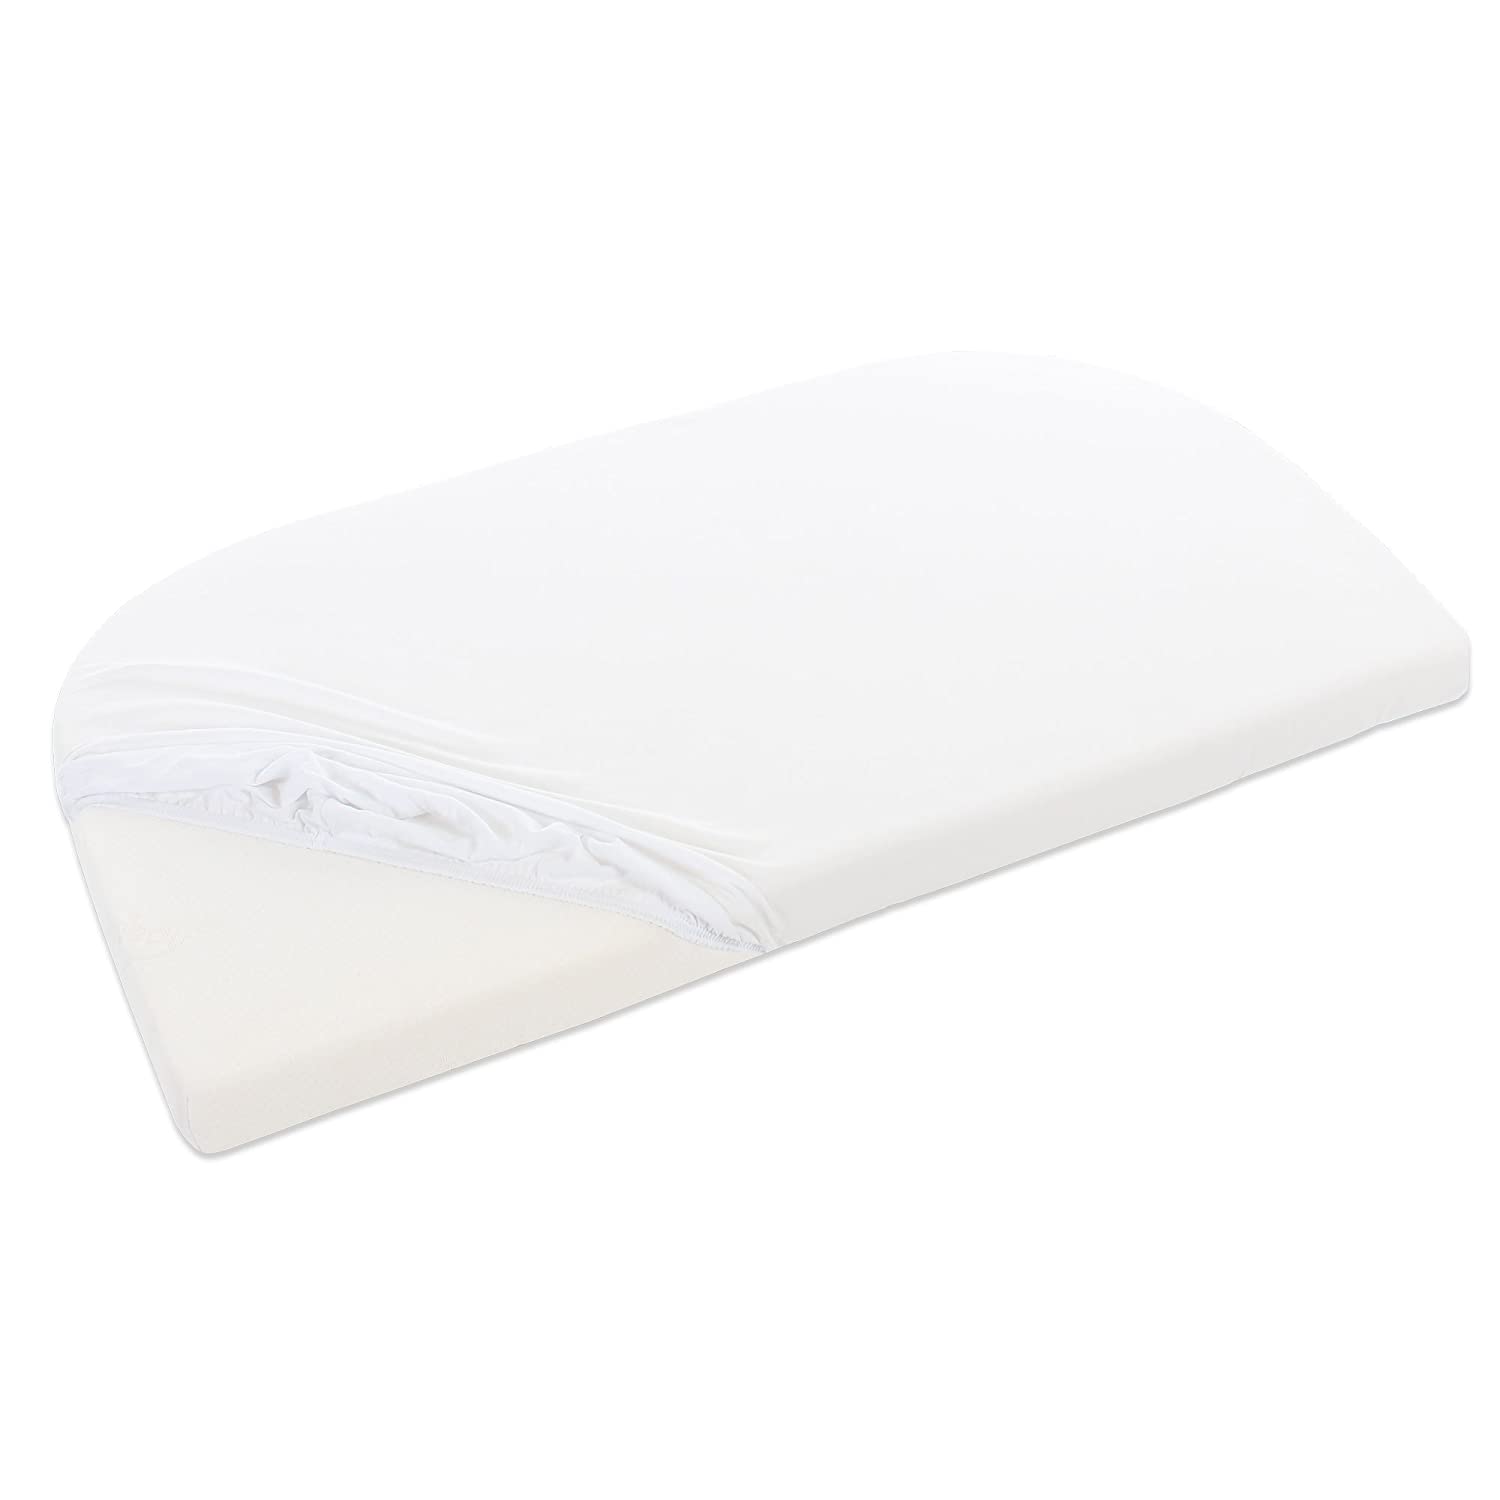 Babybay Jersey Fitted Sheet Deluxe Organic Cotton Fits Original Model, Whit